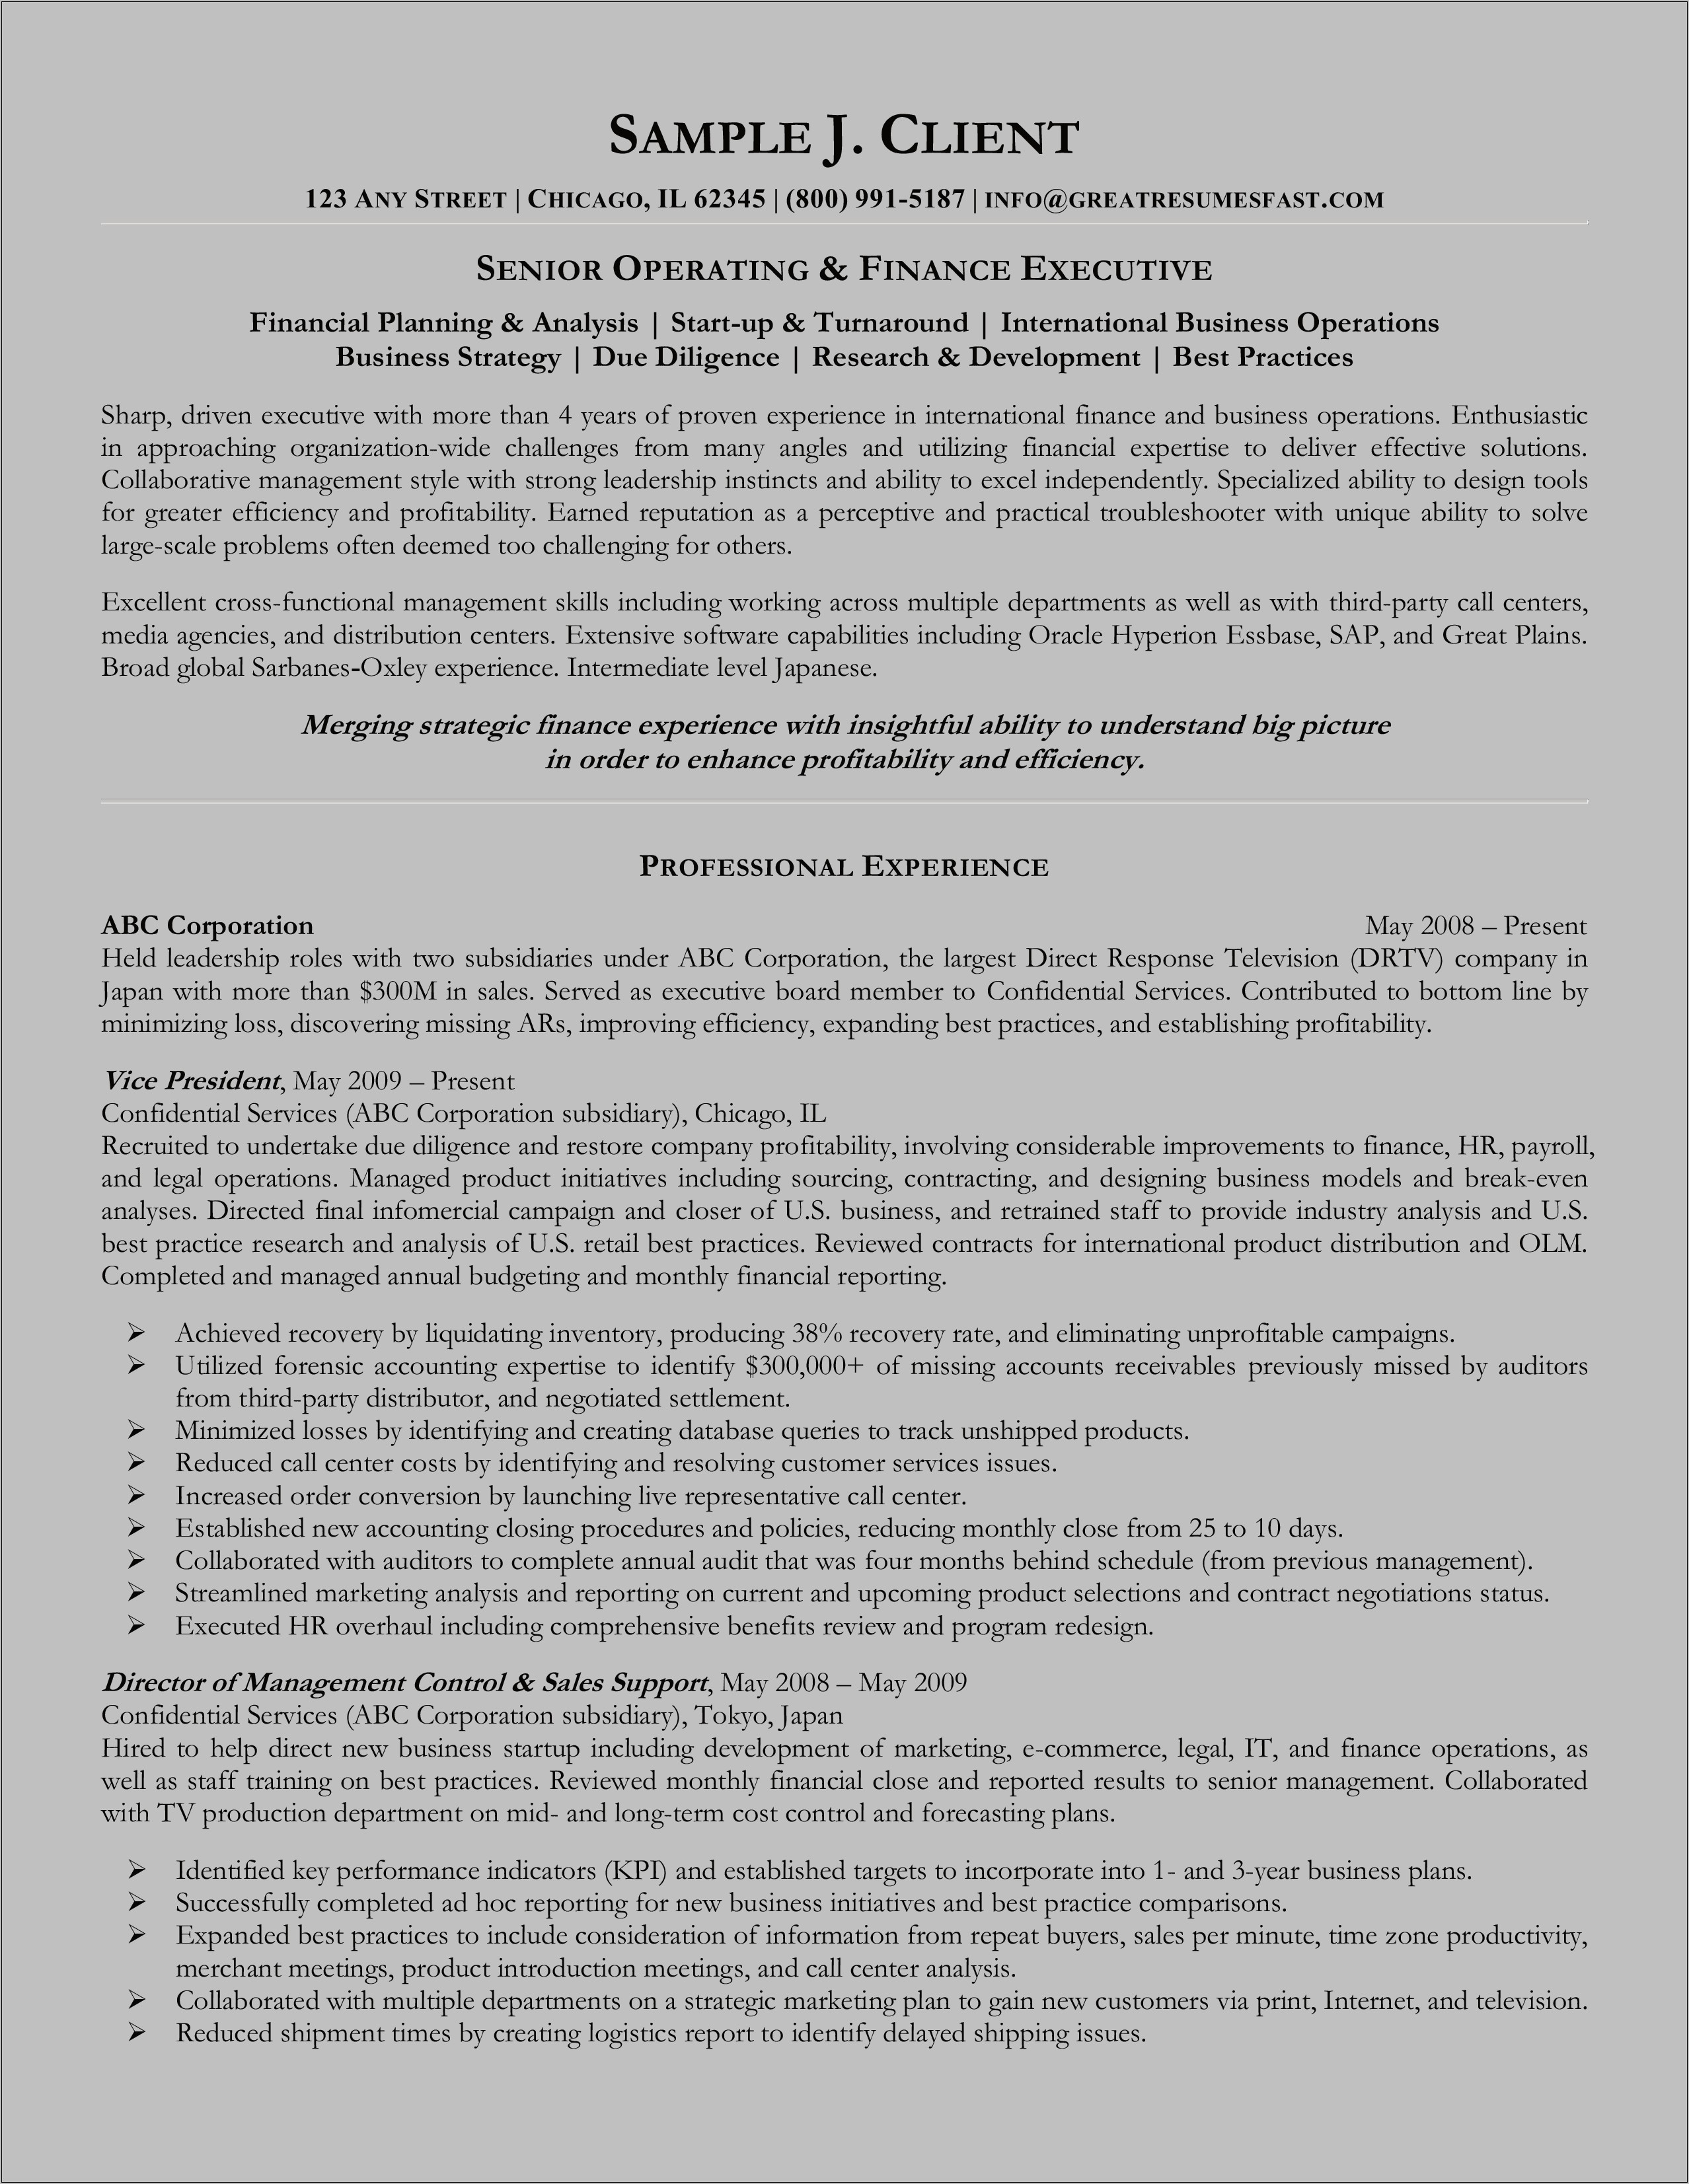 Sample Resume With Board Member Experience